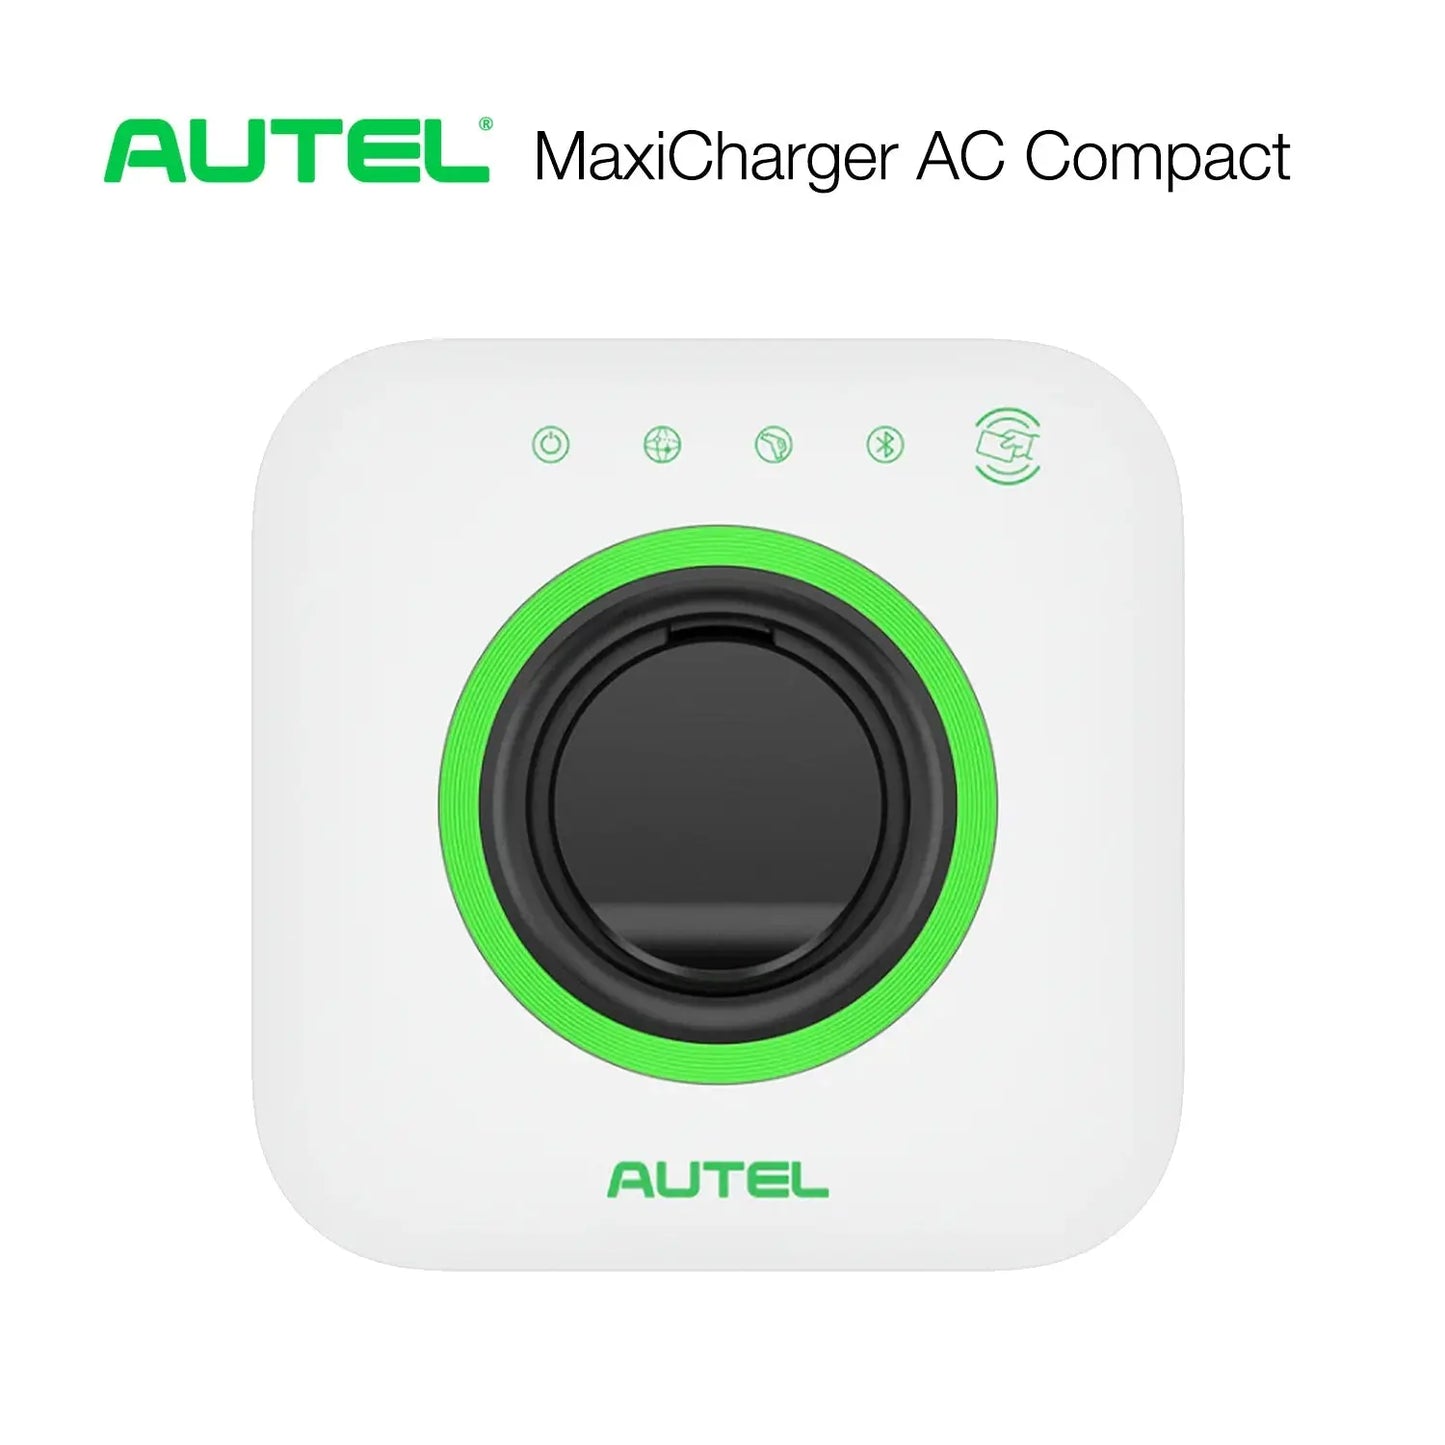 Maxi Charger Residential AC W22 Shutter AUTEL MAXICHARGER